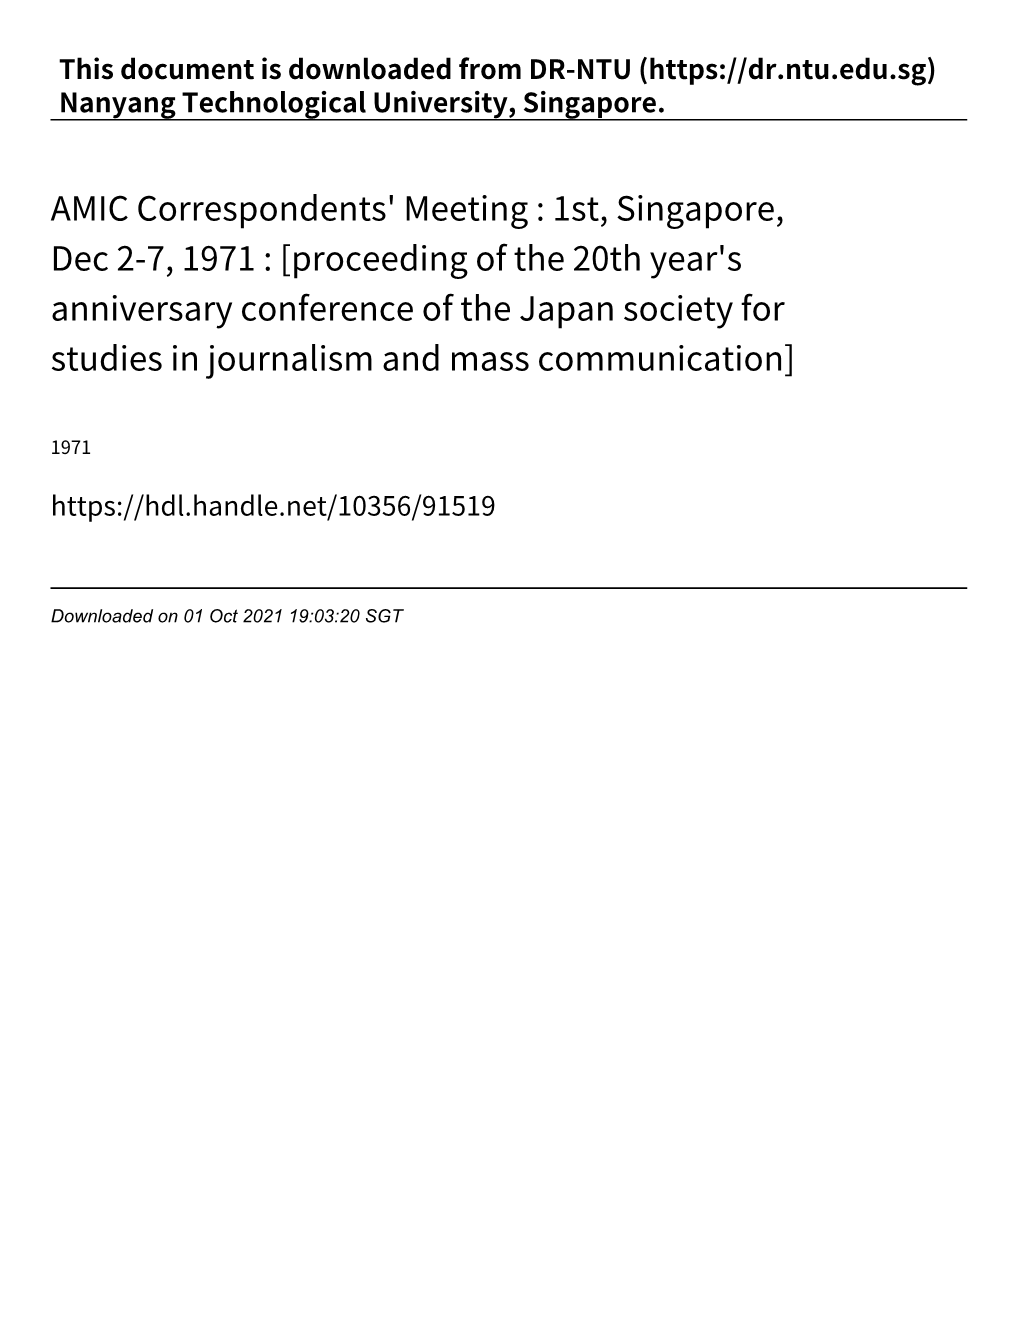 AMIC Correspondents' Meeting : 1St, Singapore, Dec 2‑7, 1971 : [Proceeding of the 20Th Year's Anniversary Confer